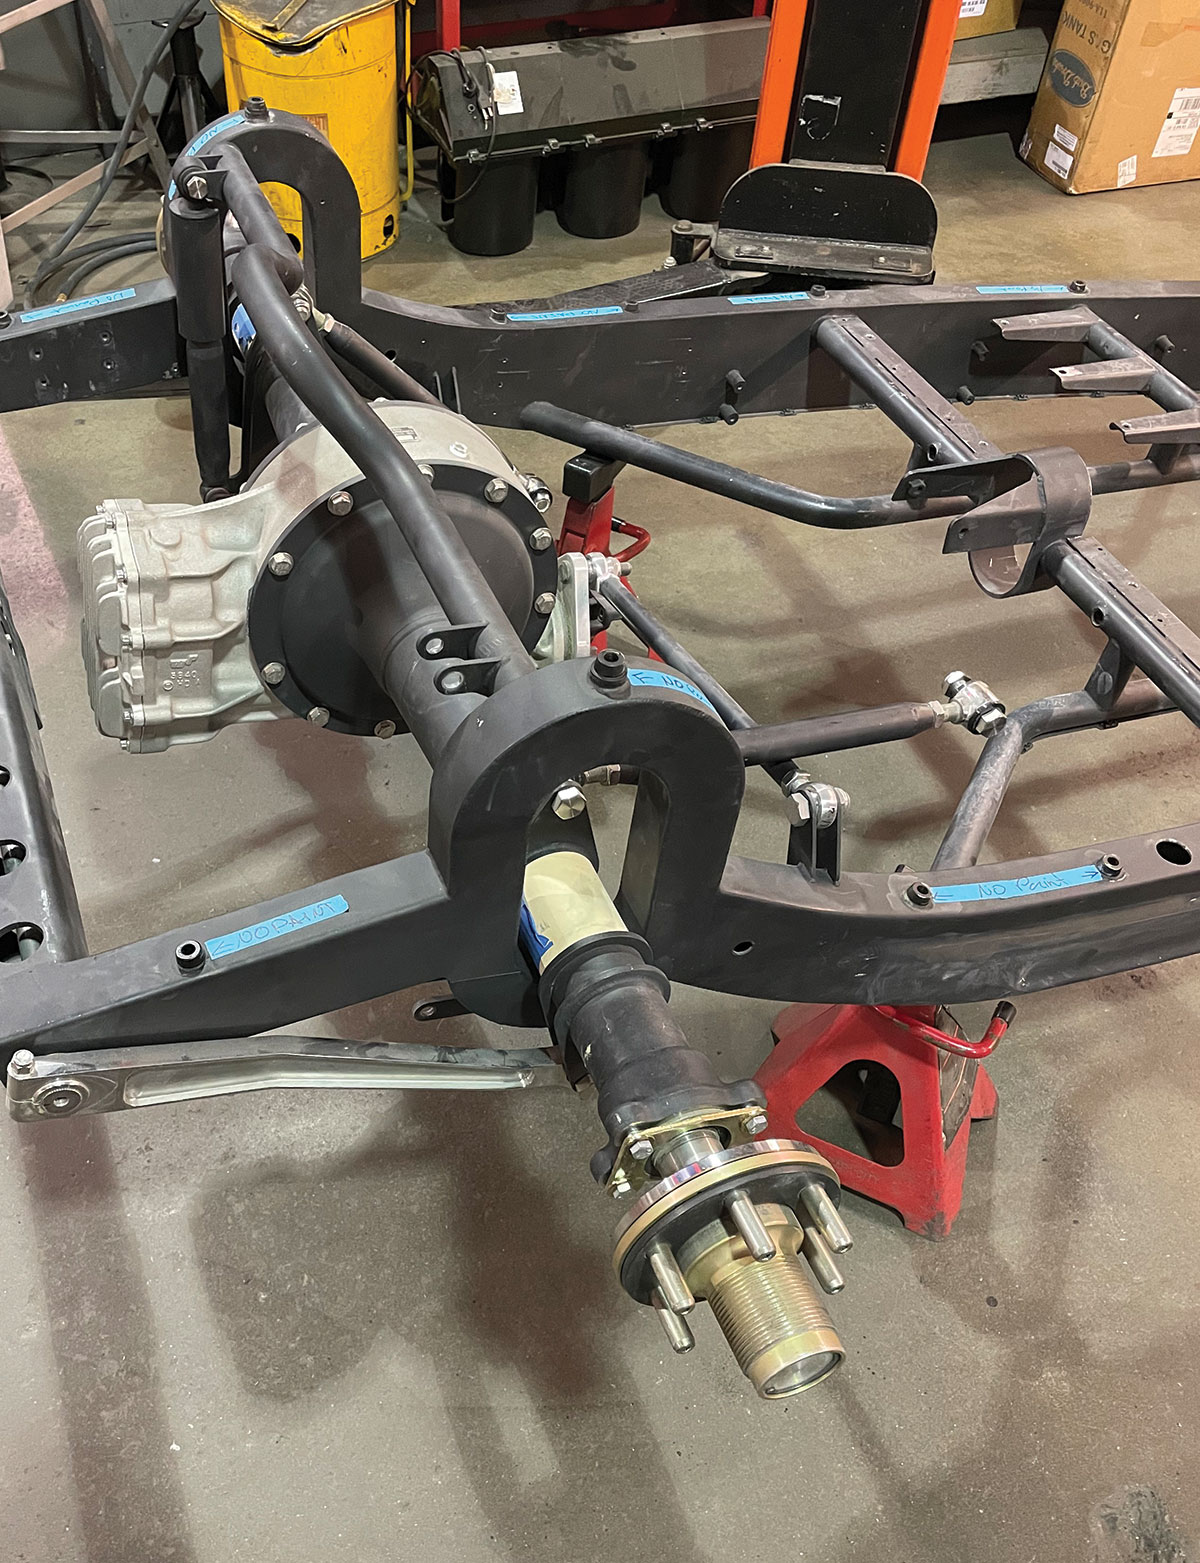 The rear axle is a beefy Winters Champ quick-change with steel tubes and bells. Suspension is by way of a torsion bar in the rear crossmember with tube shocks that attach to axle housings and a tubular crossmember.